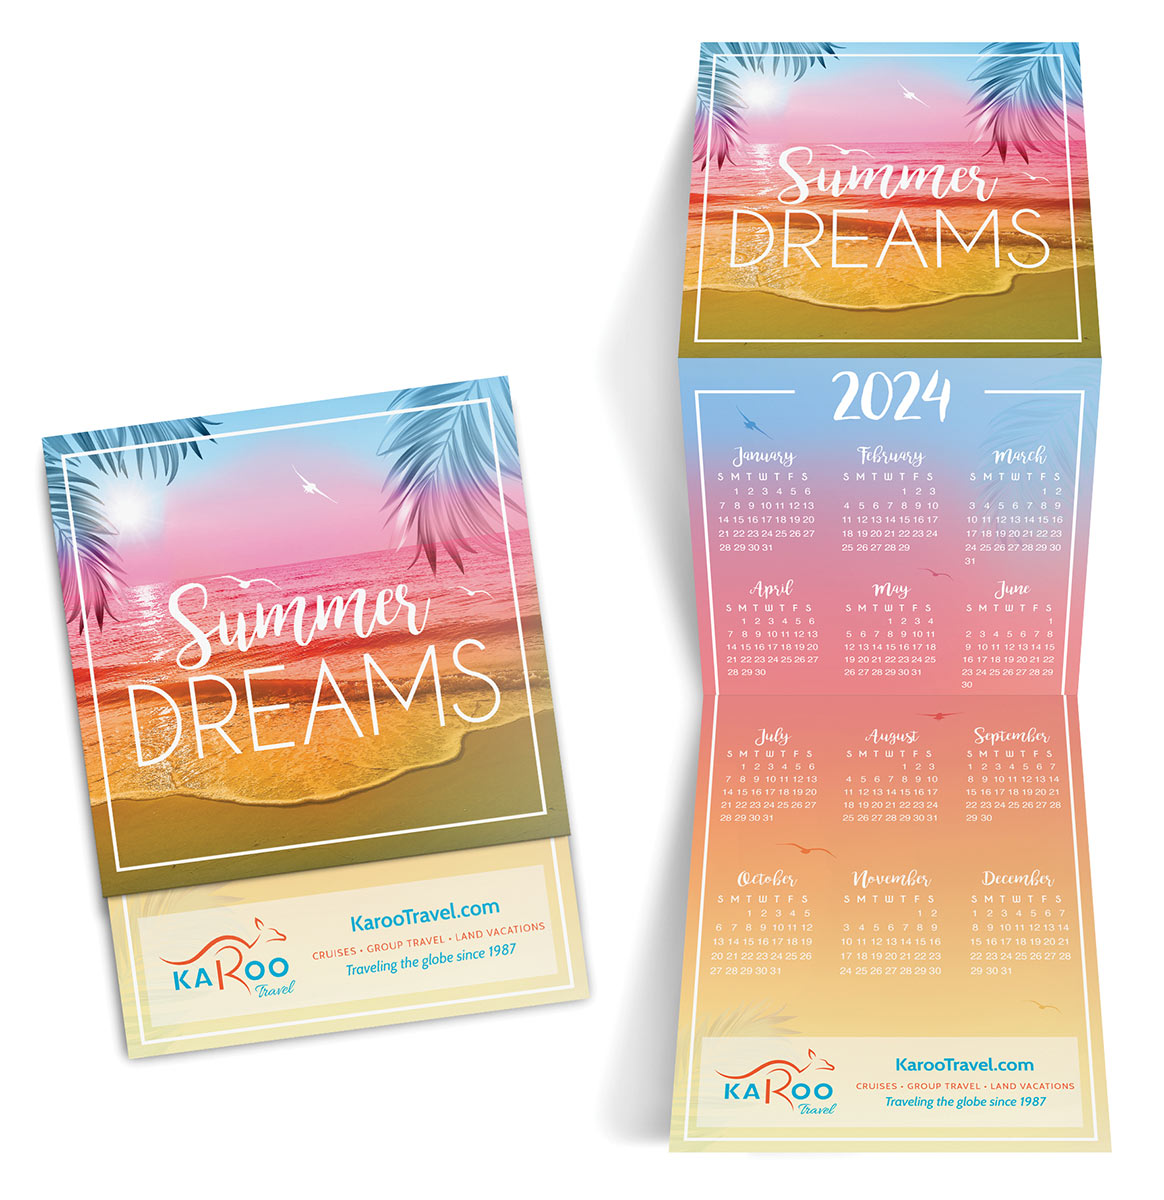 Brightly colored beach-themed z-fold calendar shown closed and open